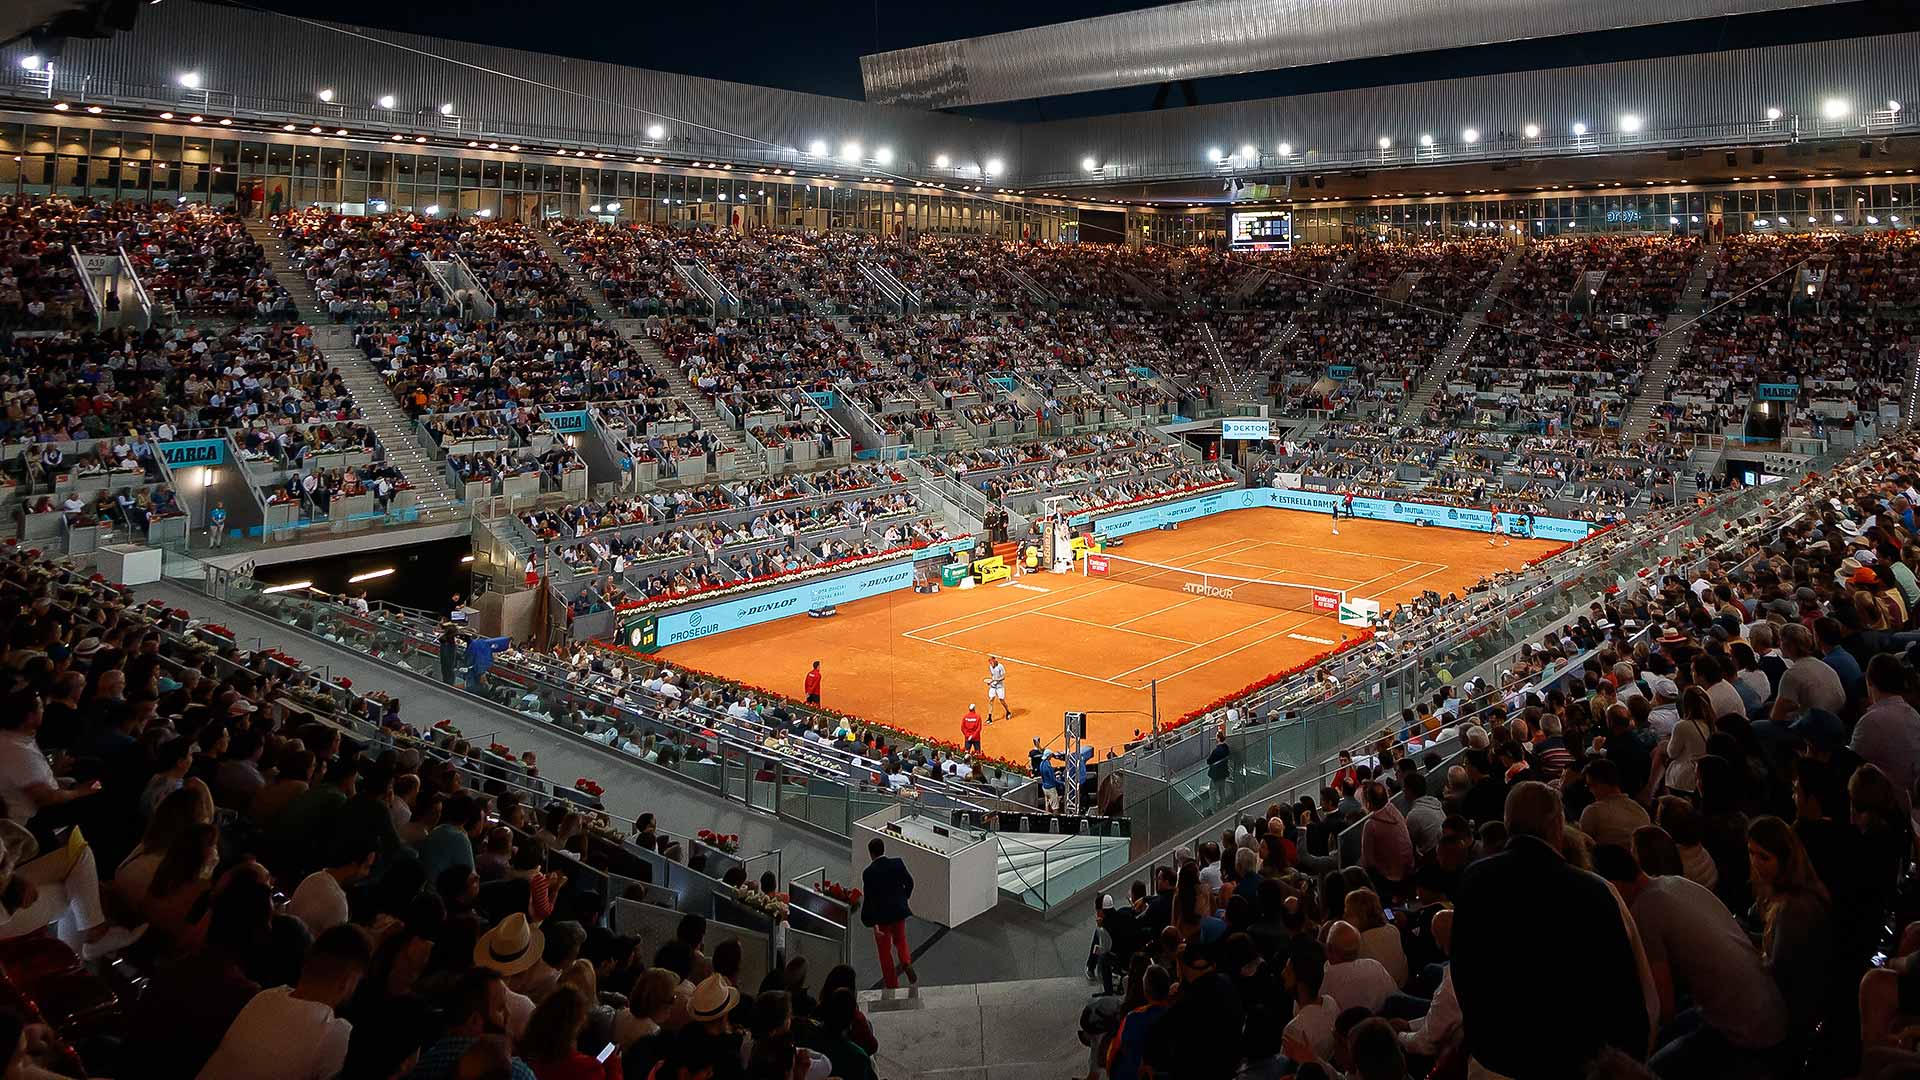 Wta madrid open 2021 results